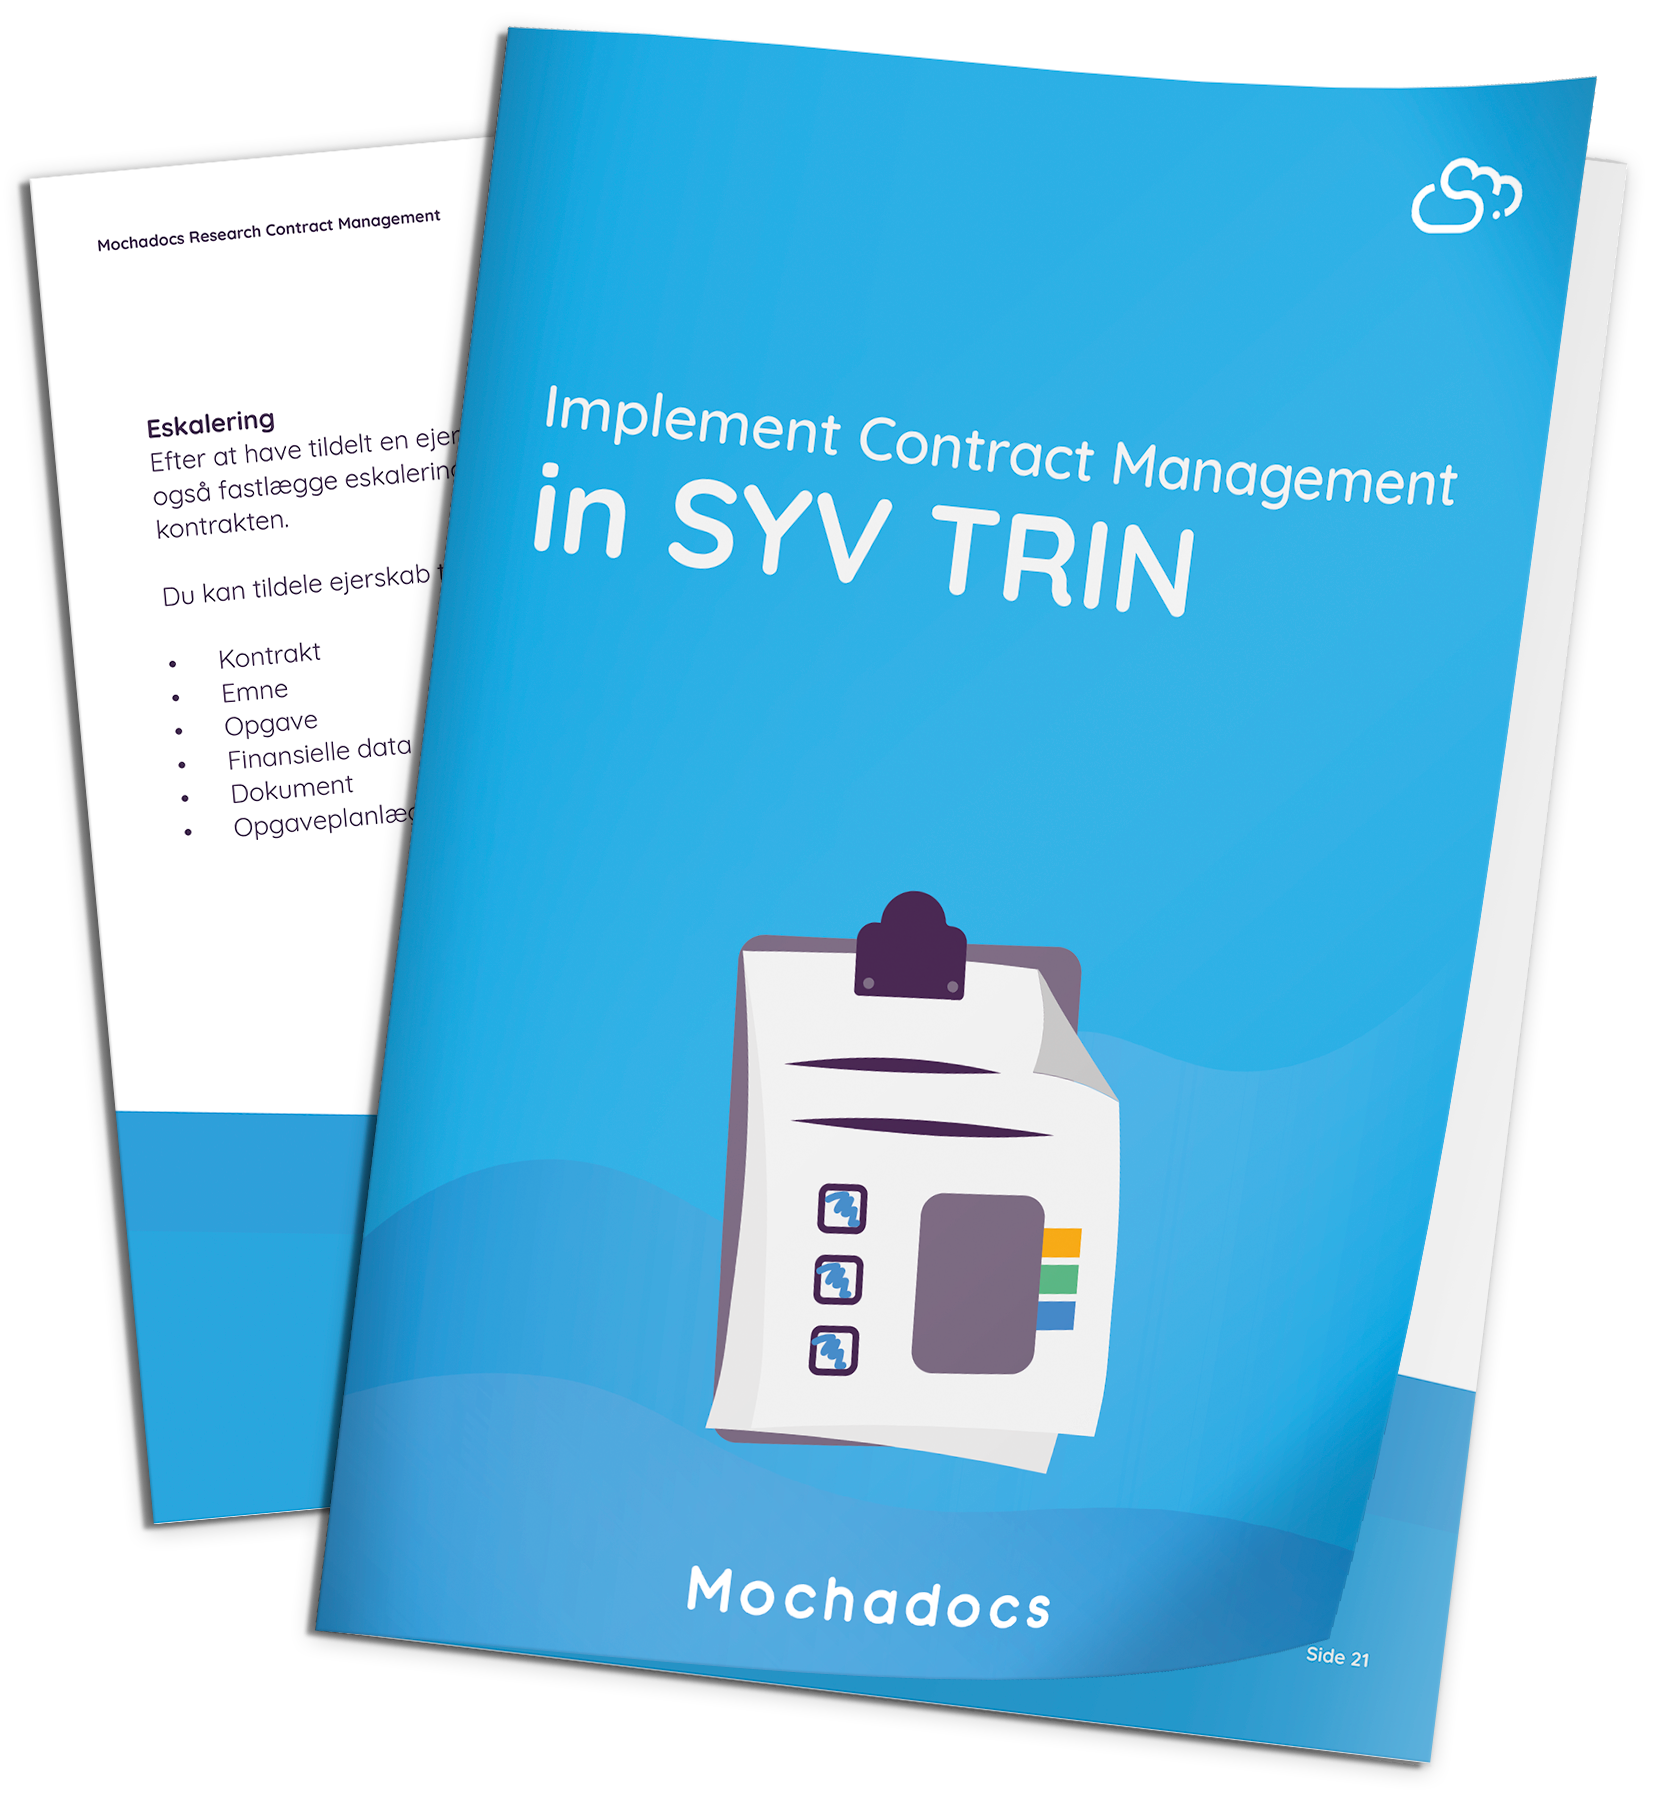 Mochadocs - Contract Management - eBook - Implement Contract Management in SYV TRIN